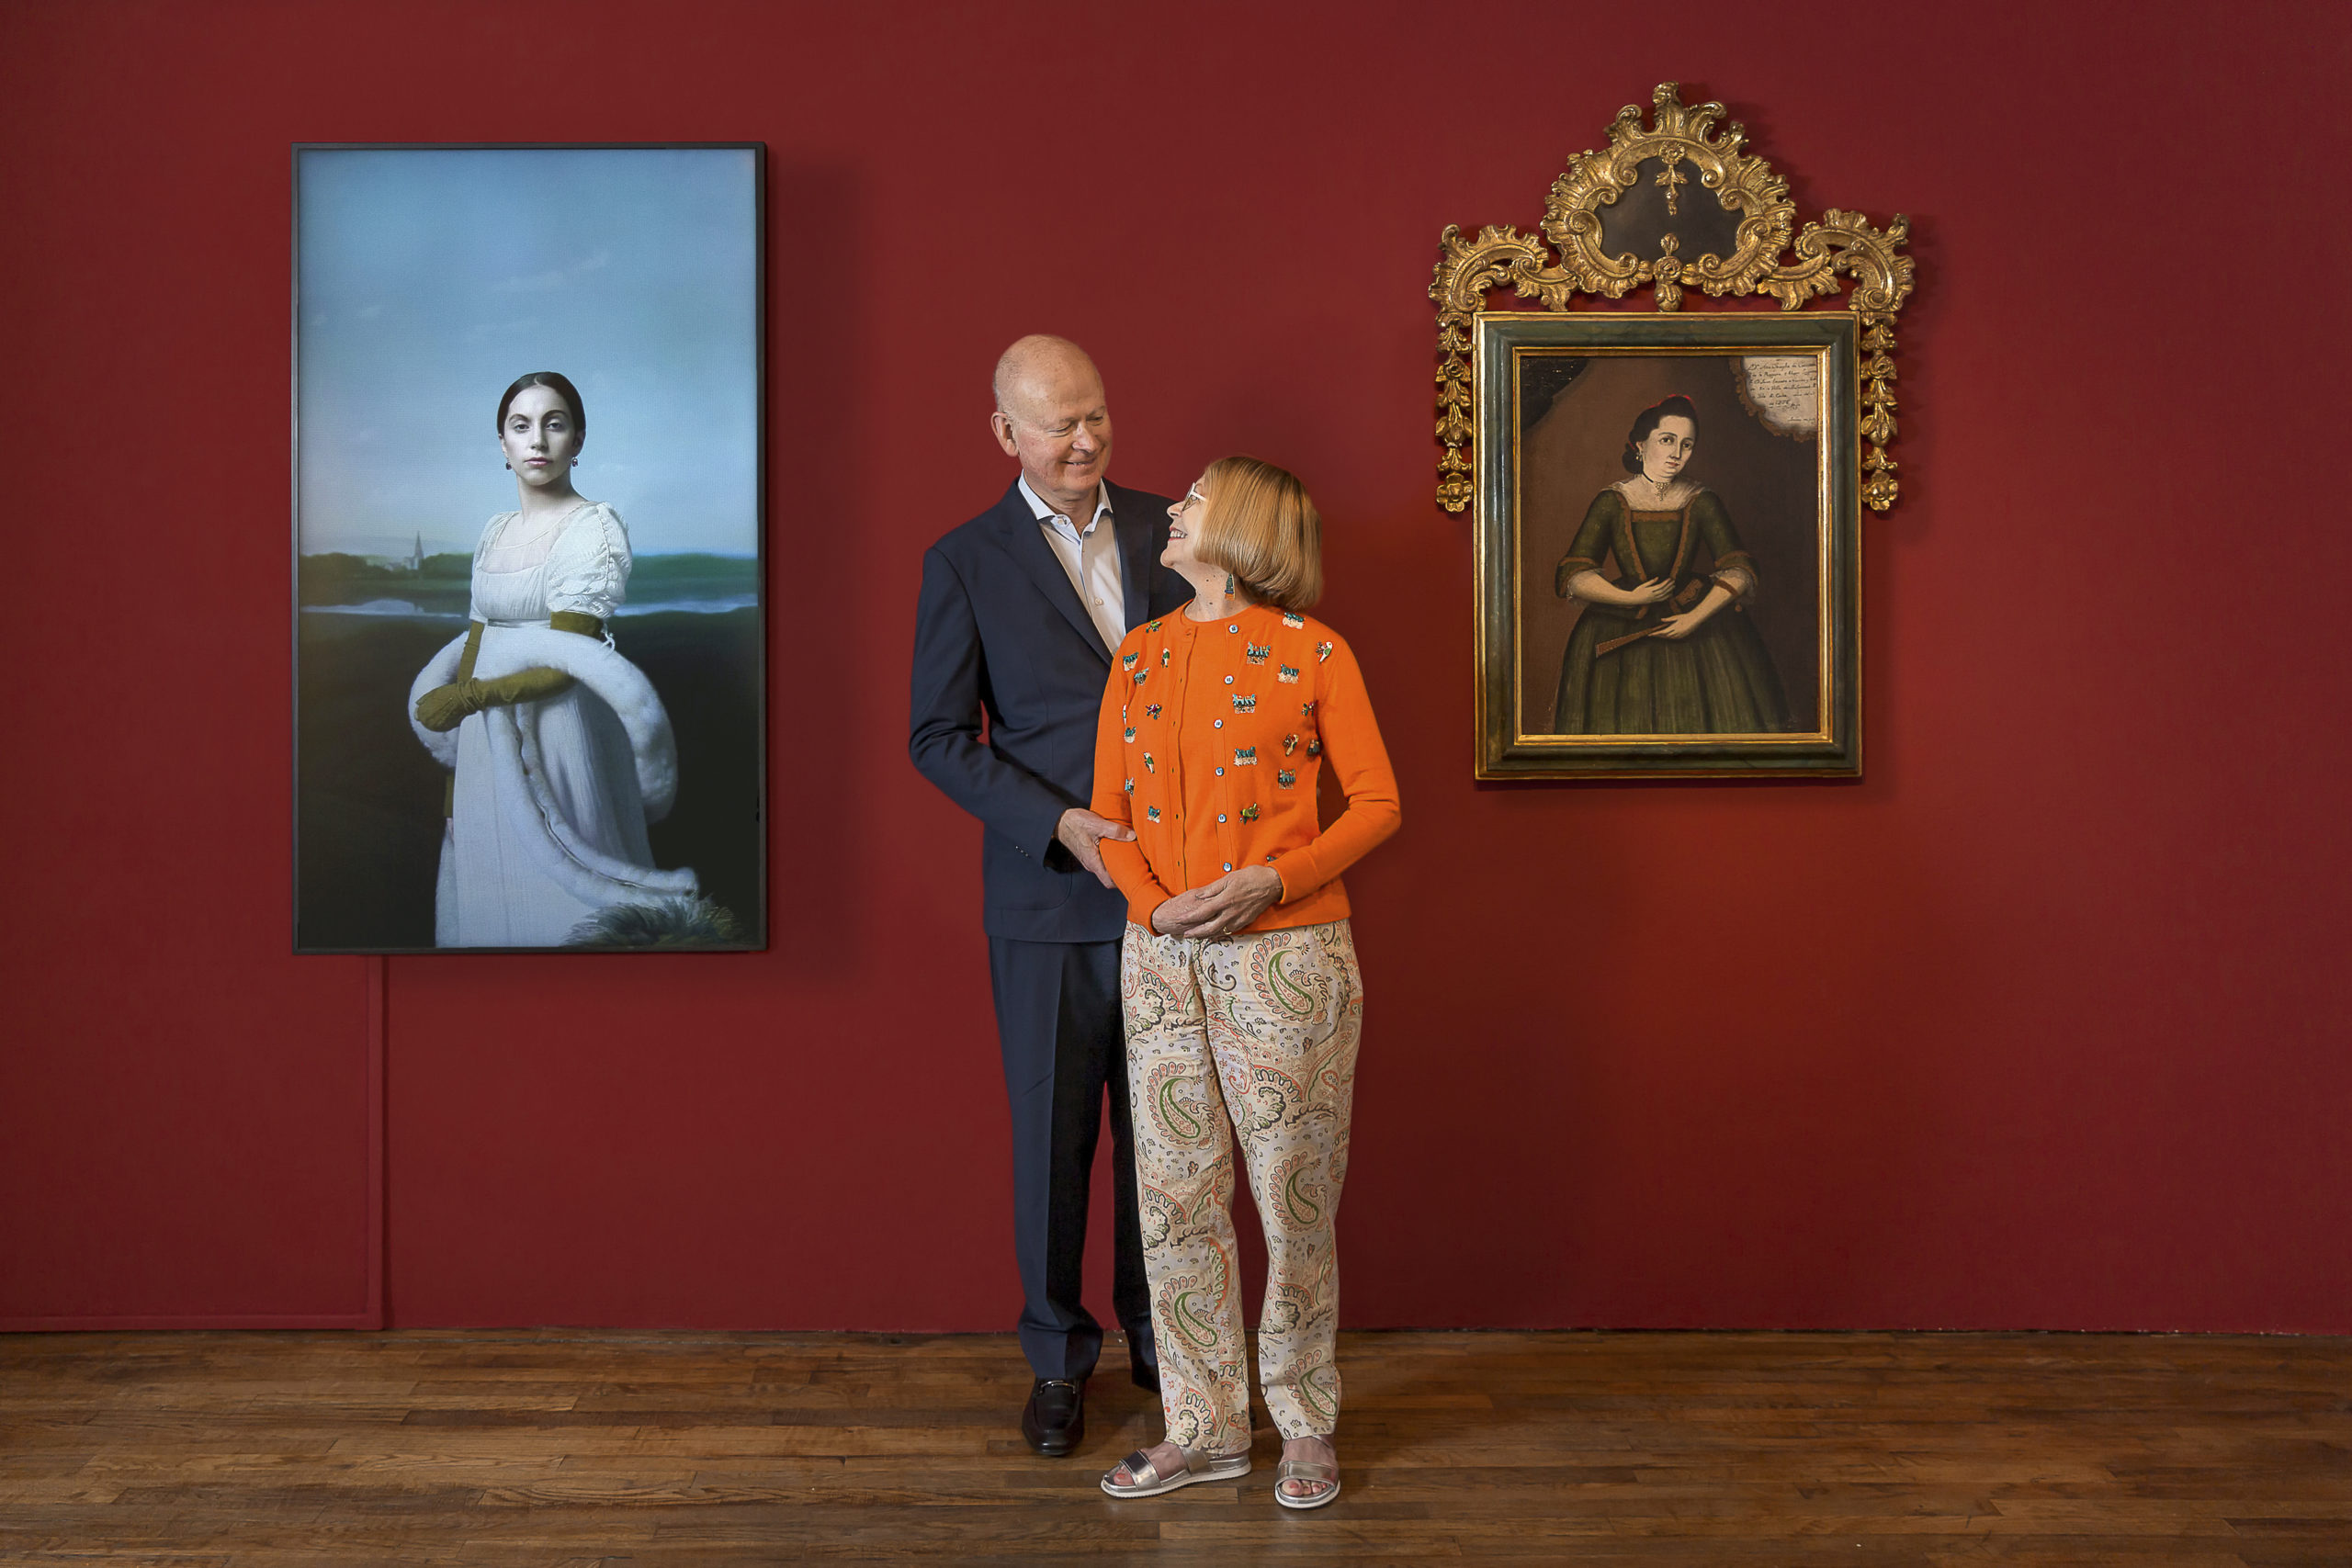 Carl and Marilynn Thoma standing in front of a red wall with two works of art.